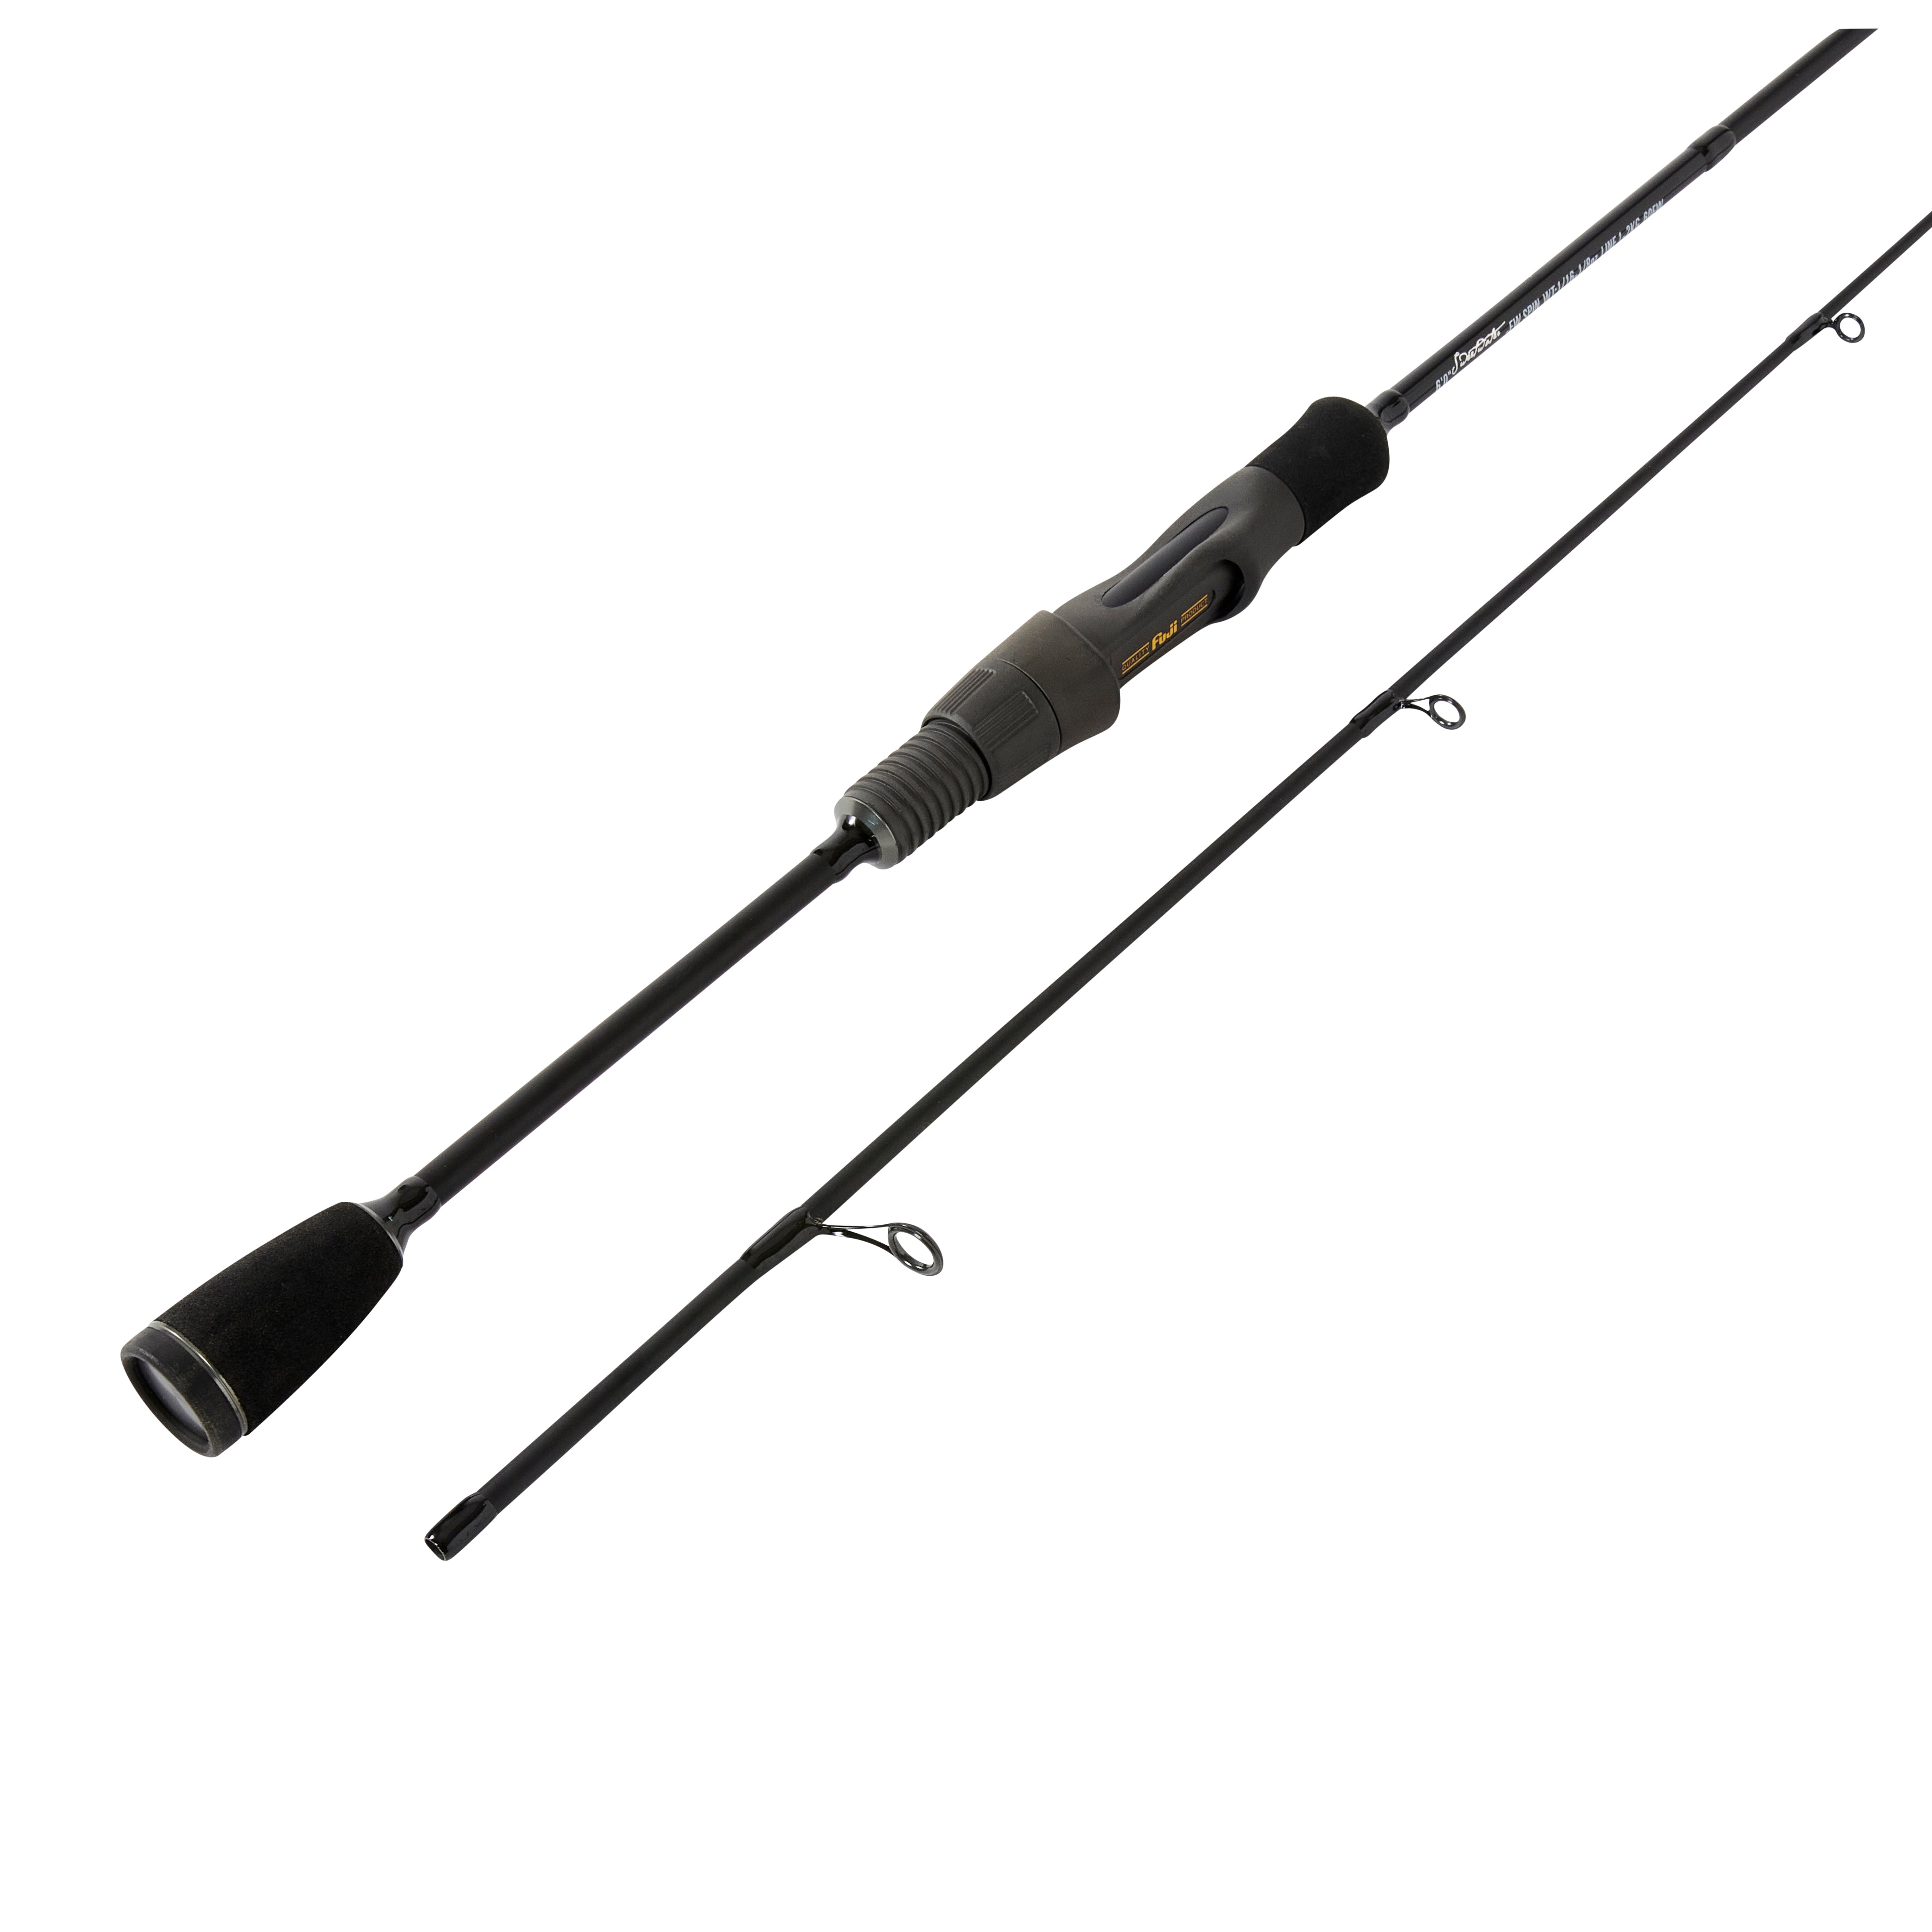 Nitro Sweetwater 5ft11 1-2kg Spin Rod